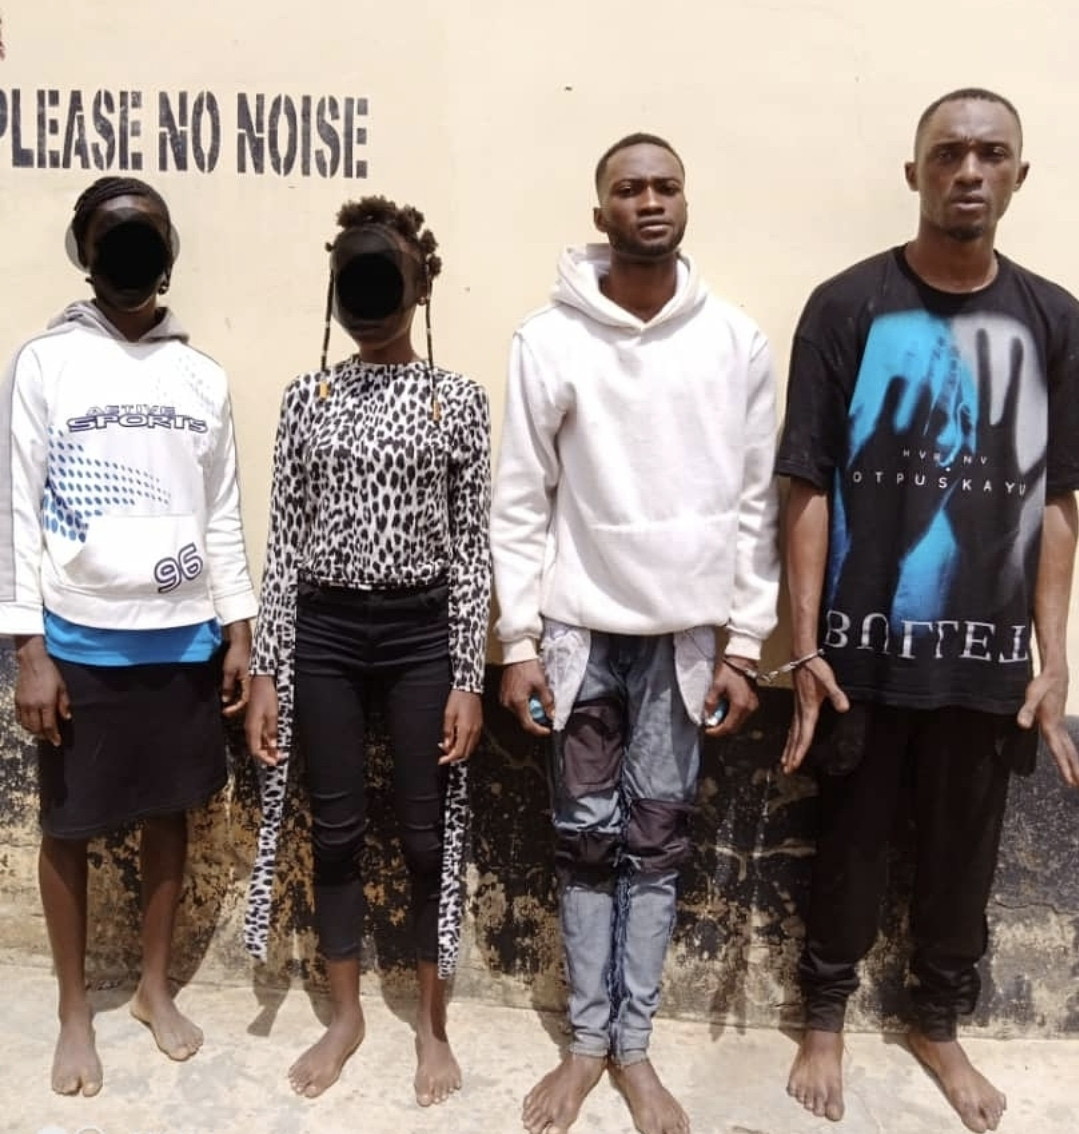 Teenager, Boyfriend, Two Others Arrested For Conspiracy, Self-Kidnapping